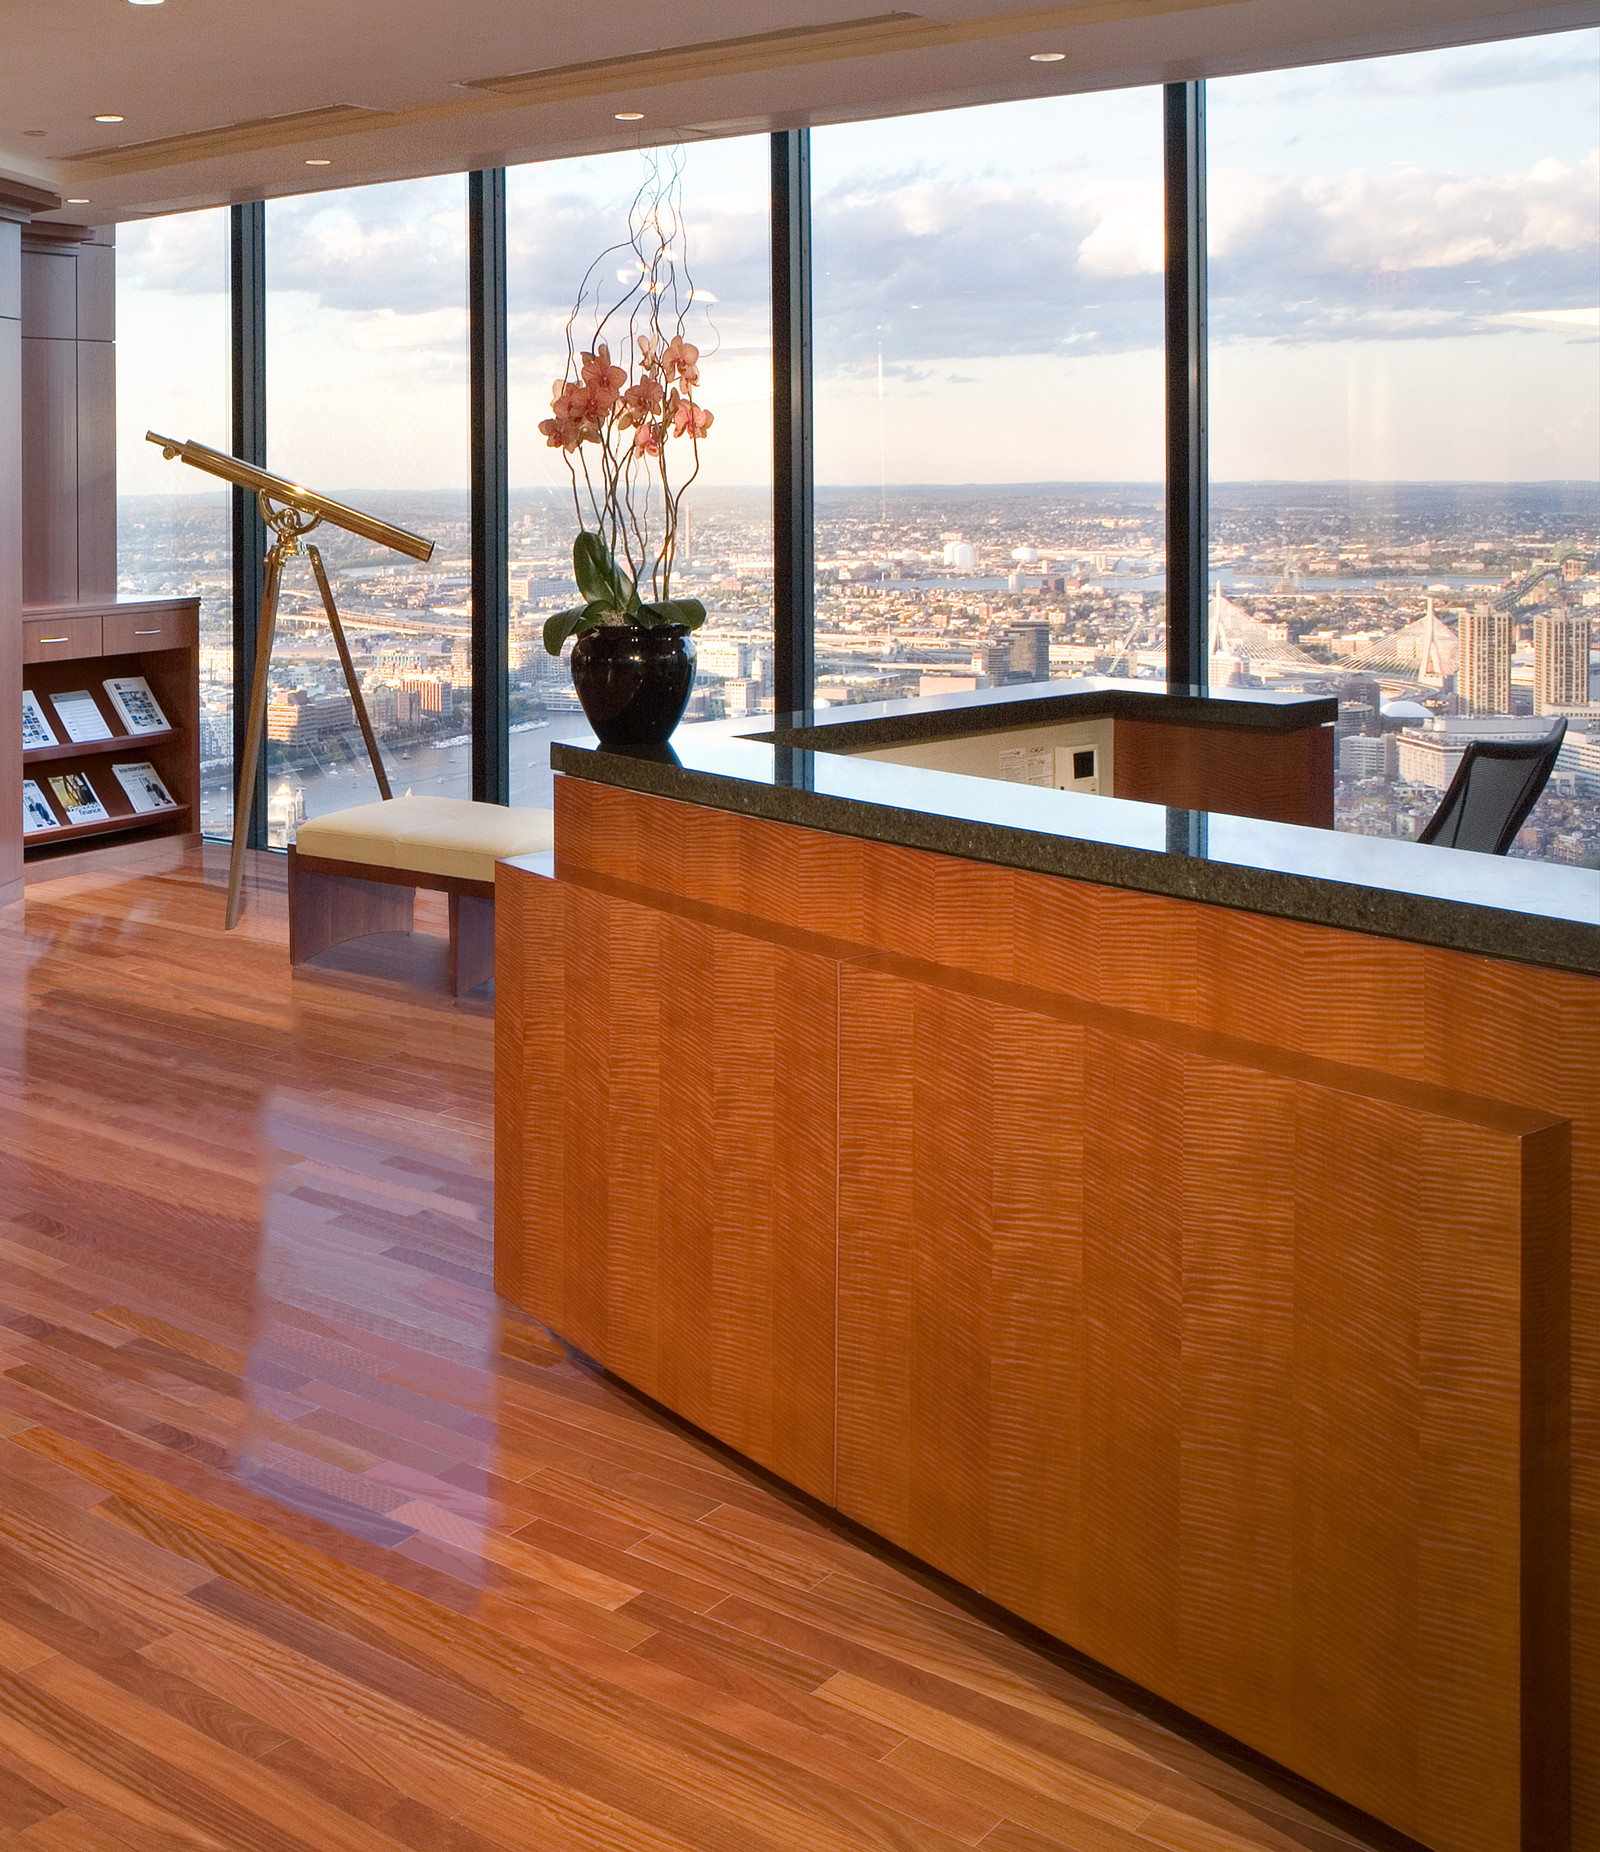 This reception desk sets the warm tone for this dramatic space in the center of Boston.